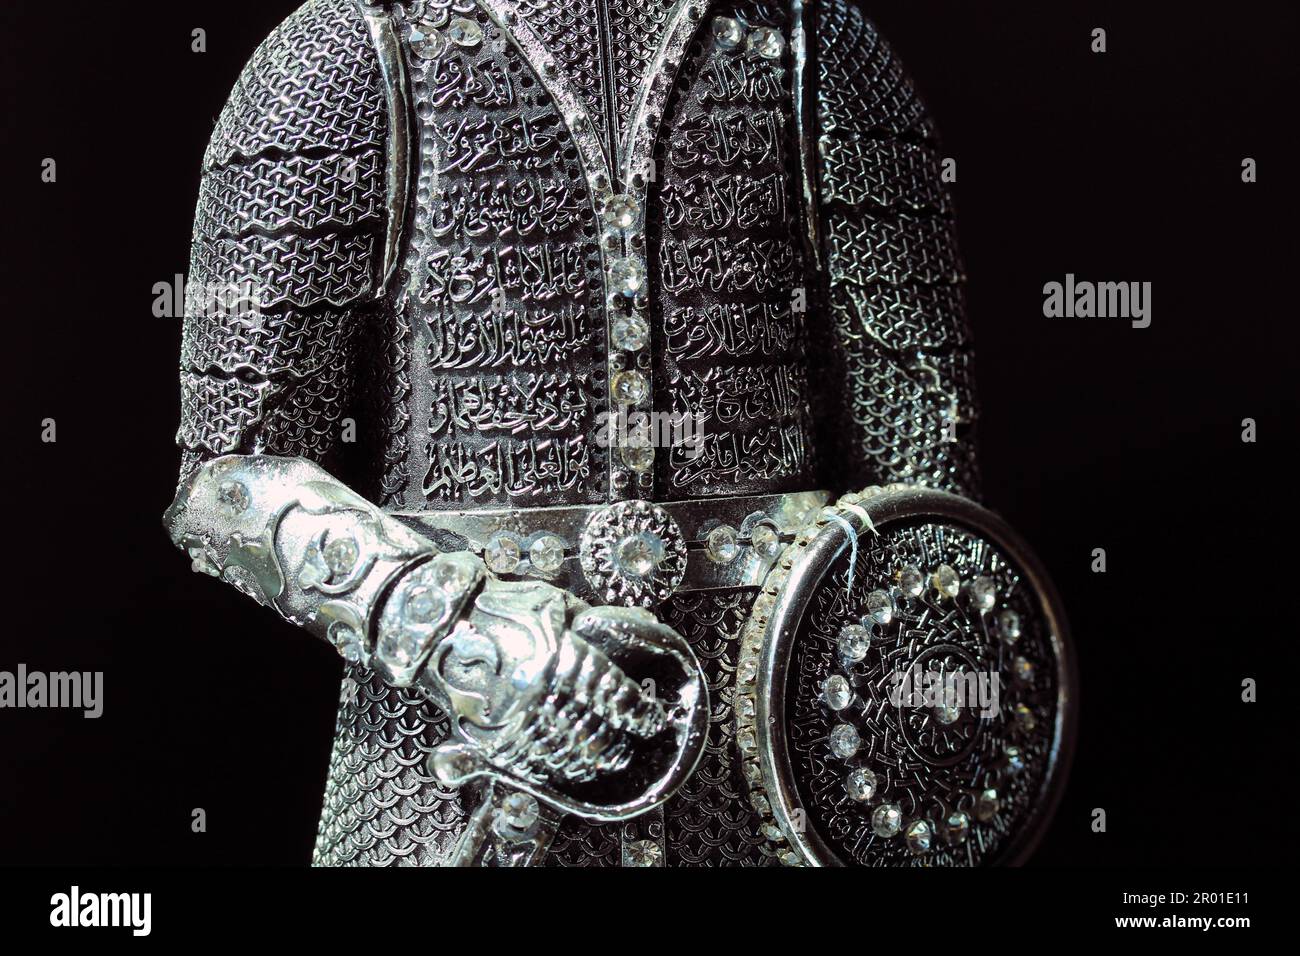 The war suit of a high-ranking commander in the Seljuk army. Metal model of the Turkish war suit. Stock Photo